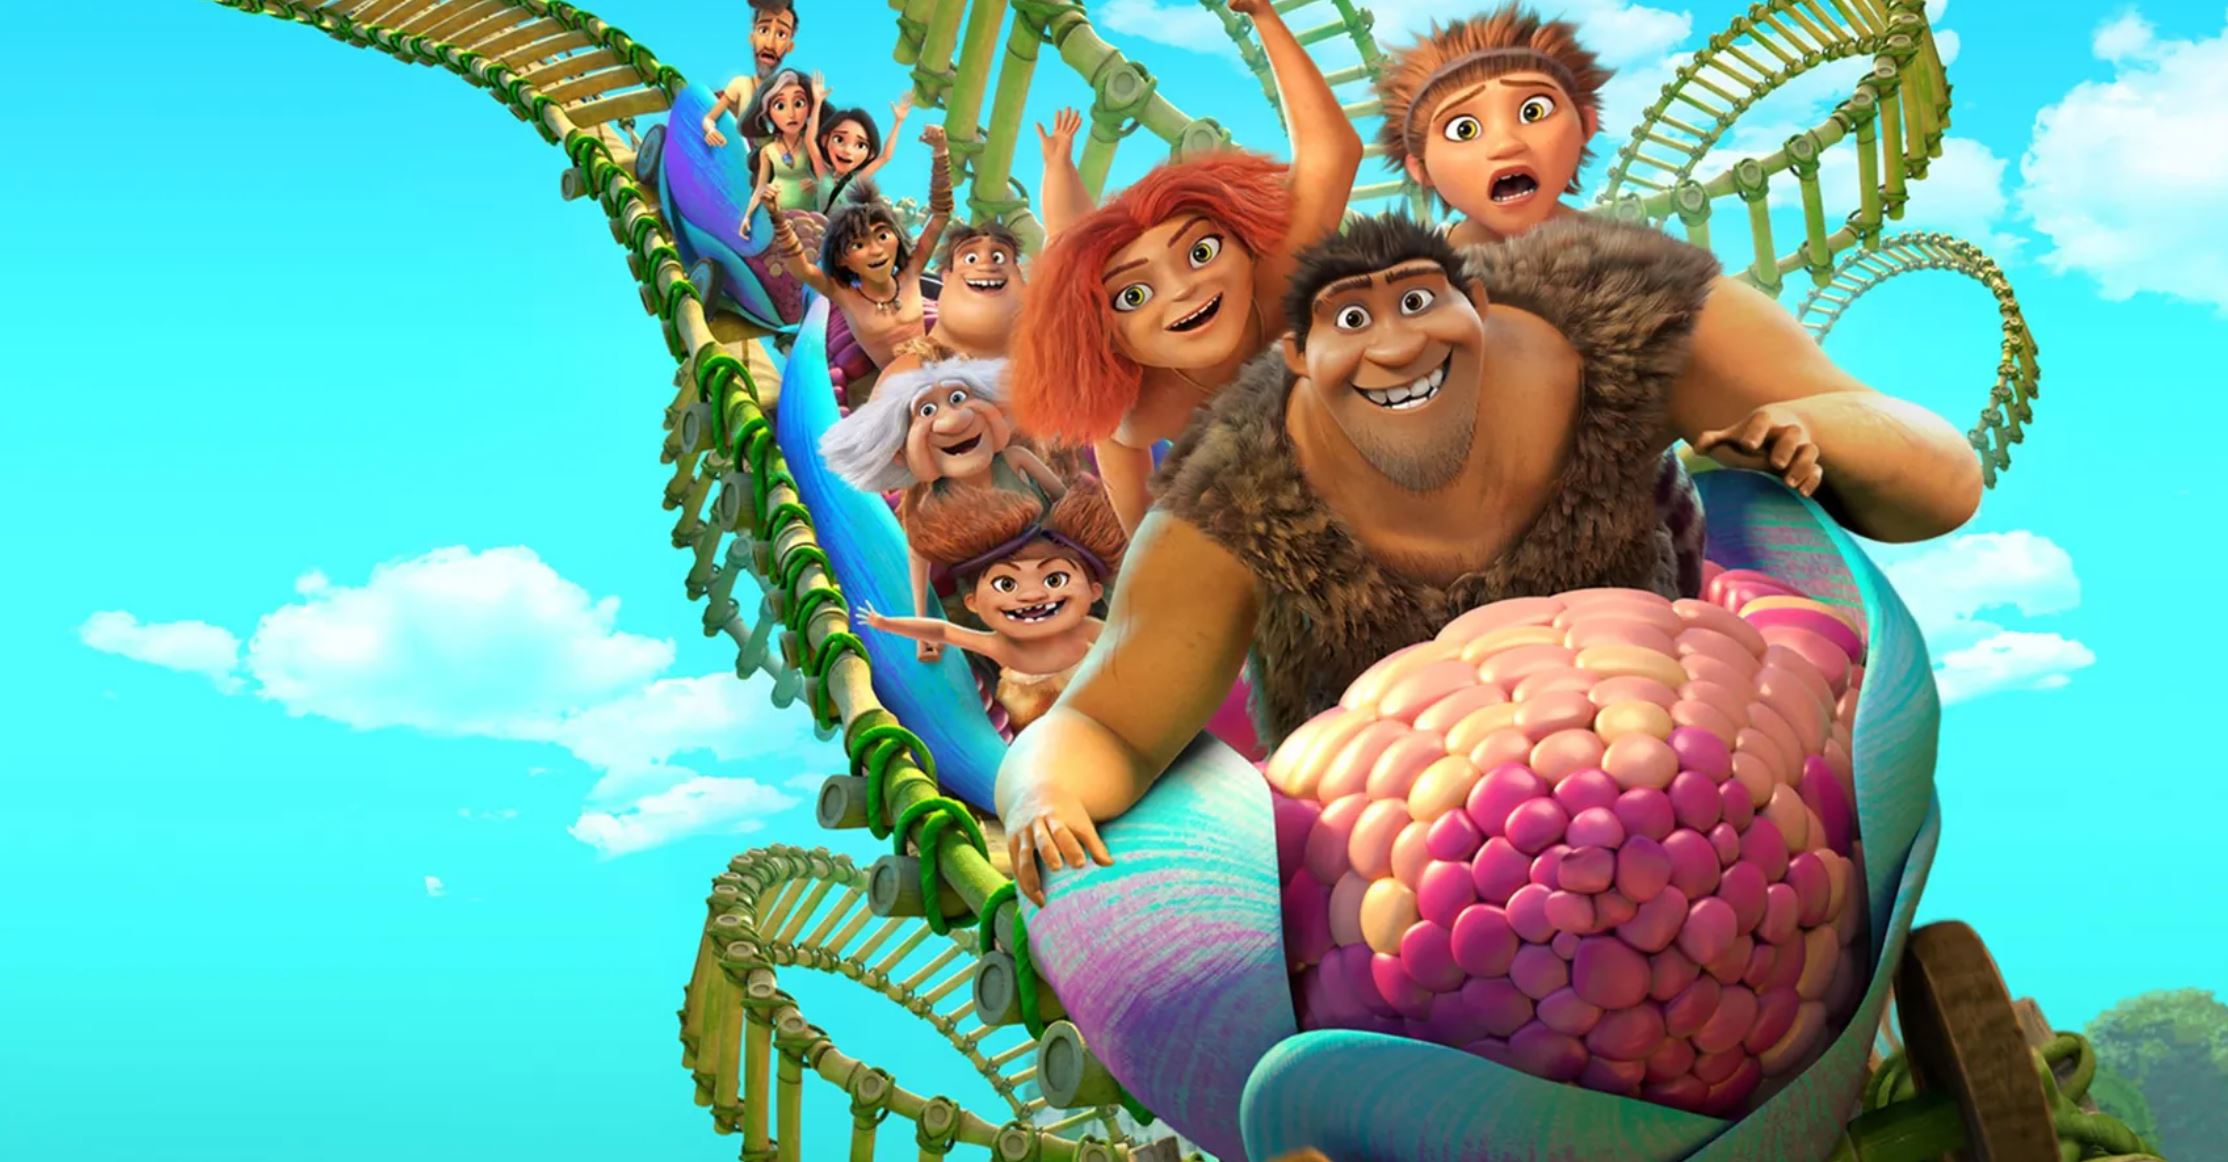 How To Watch The Croods Season 5 In Canada On Hulu (Tested)